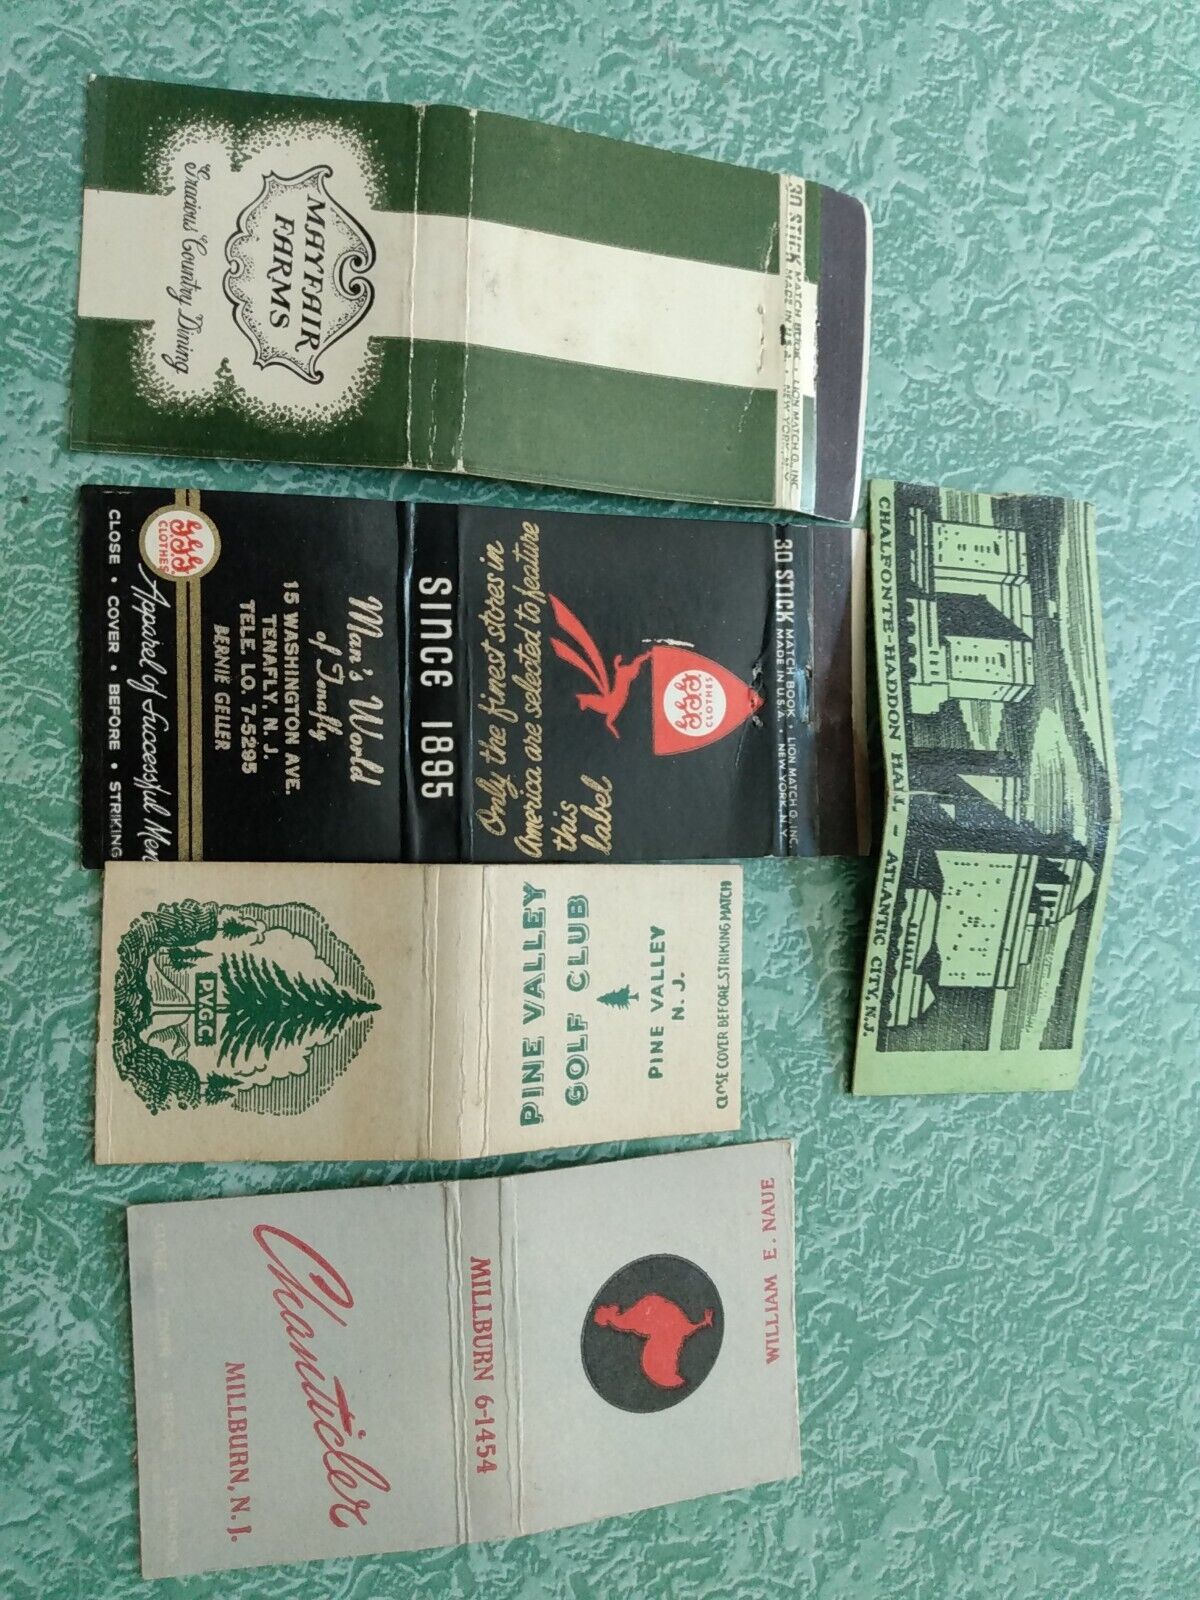 Vintage Matchbook Cover VM4 Collectible circa 1941 lot New Jersey various